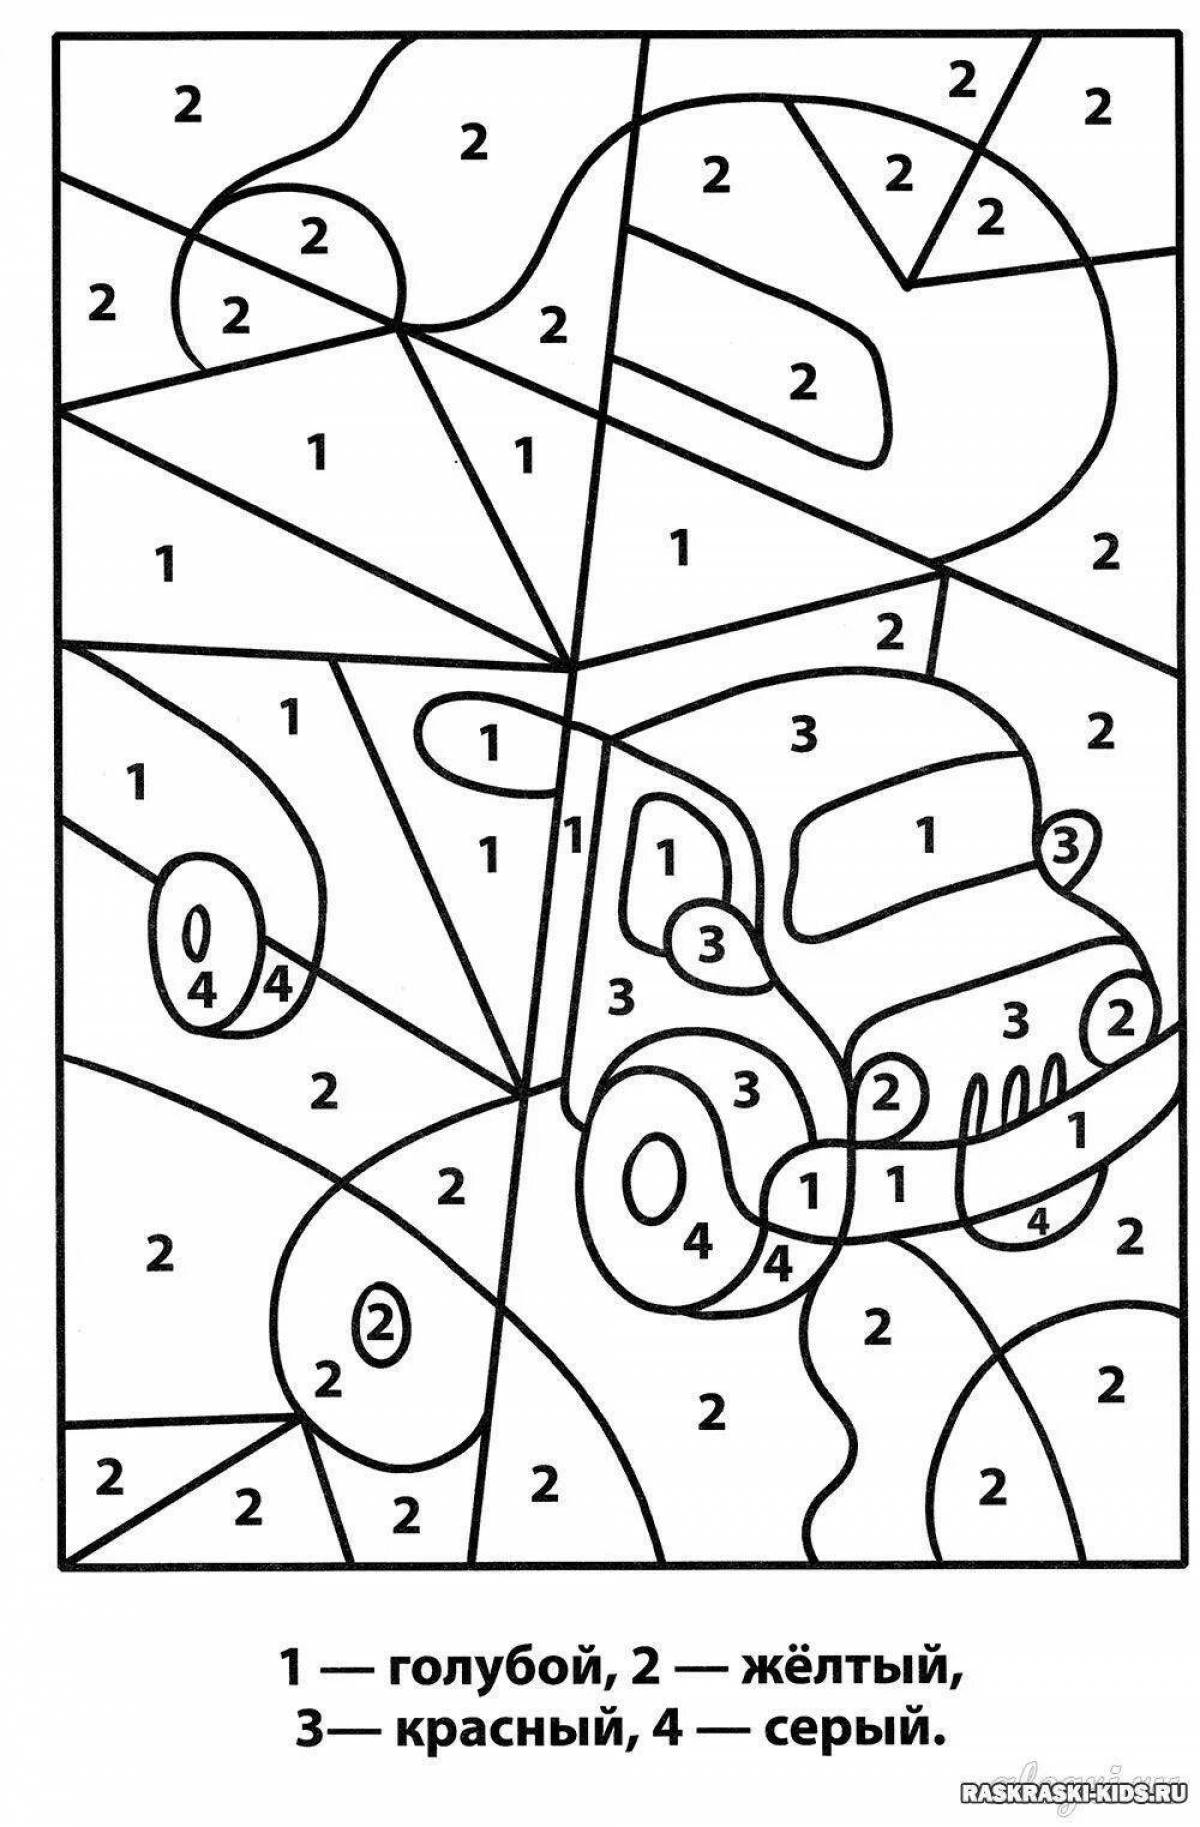 Charming 7 year old coloring book by numbers